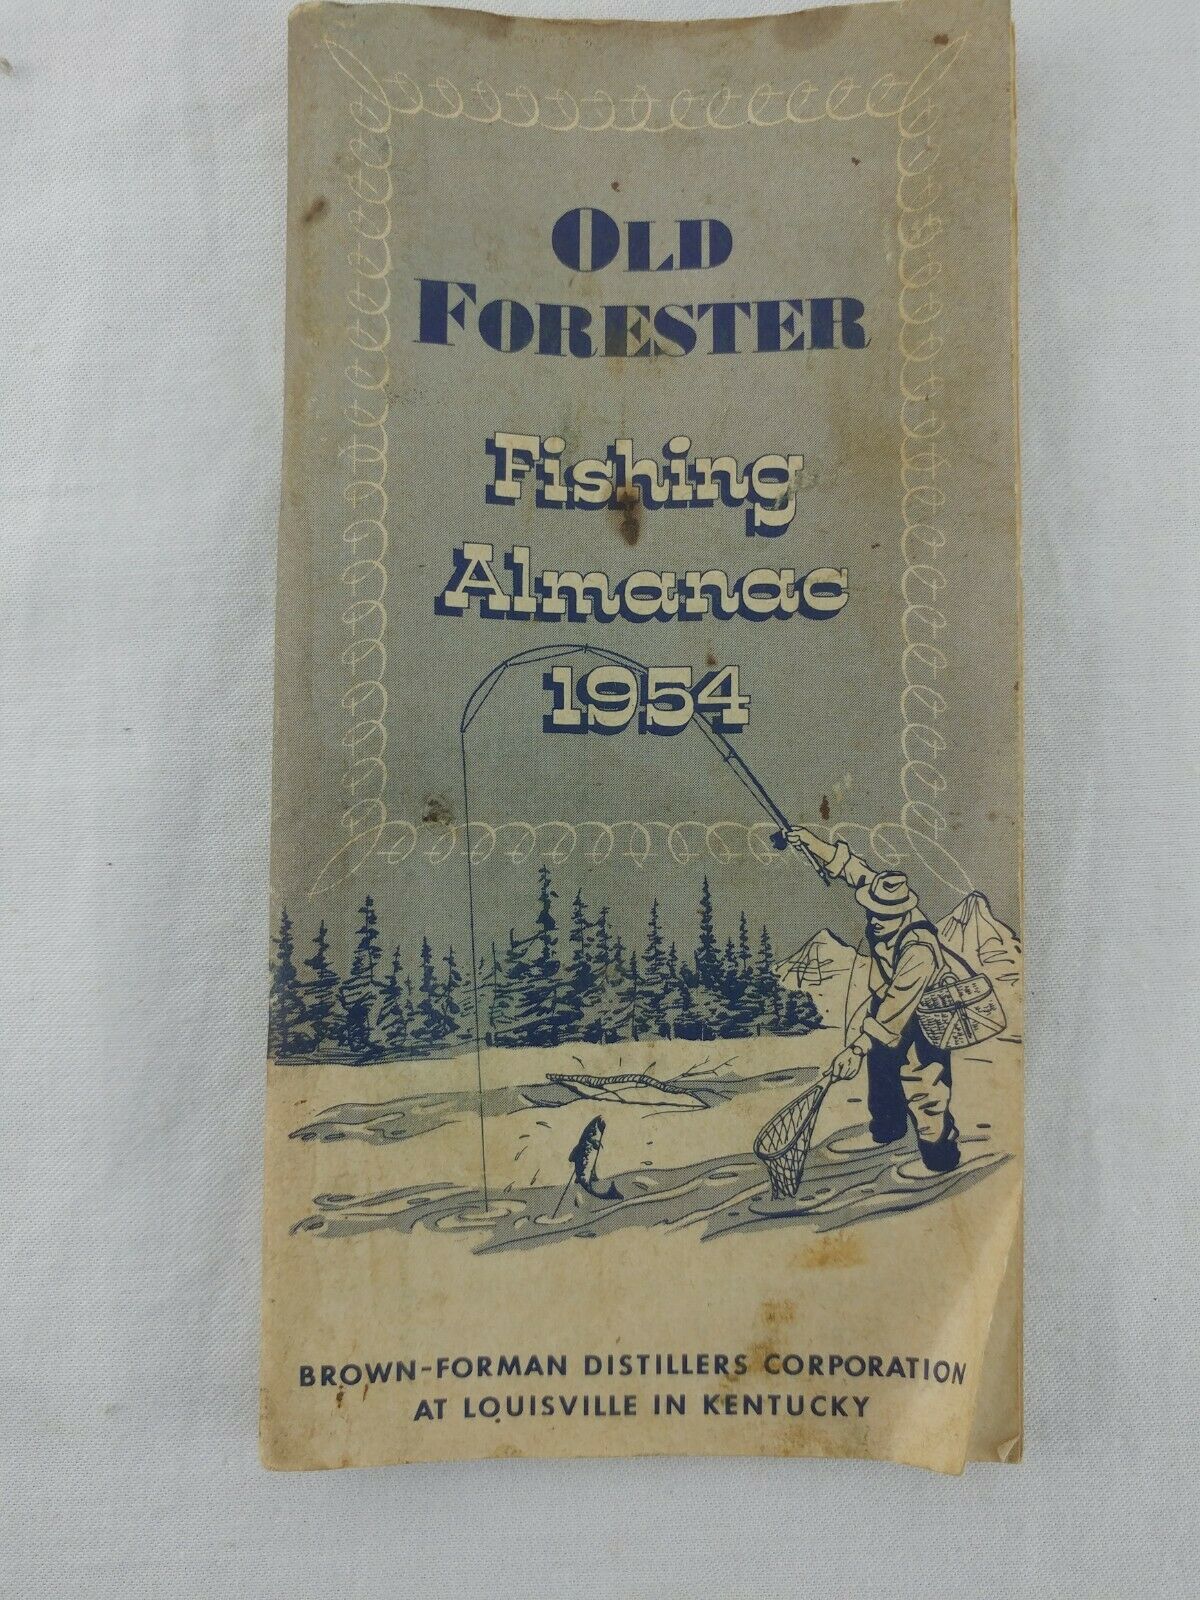 Old Forester Fishing Almanac 1954 Brown Forman Distillers Corp Louisville Ky Vtg